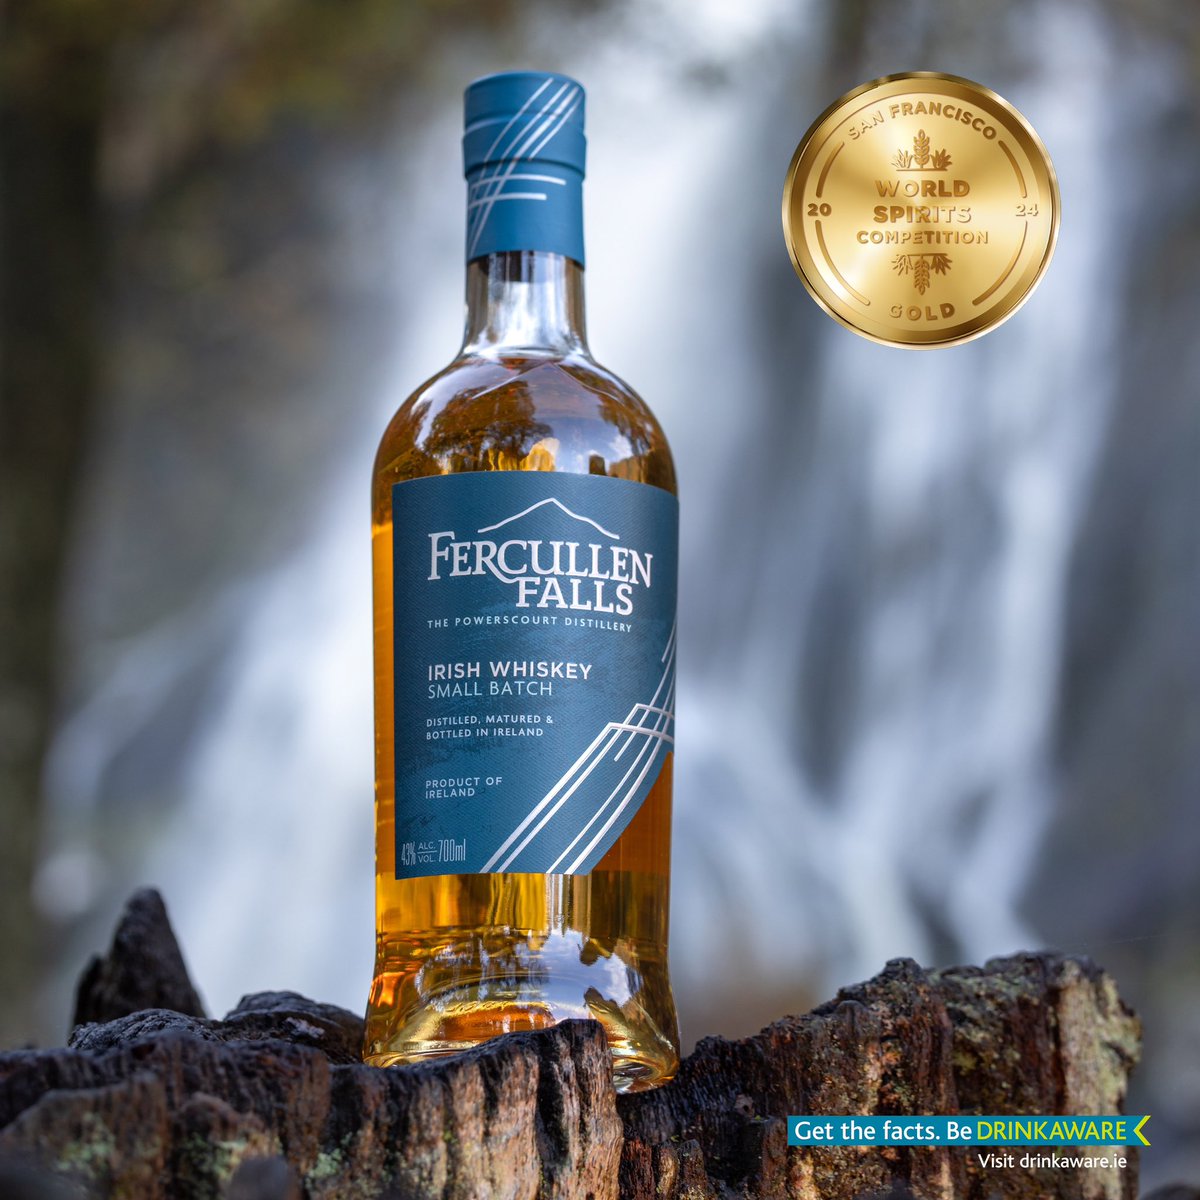 DOUBLE GOLD WINNER & GOLD WINNER 🥇🏆 We’re delighted to announce that Fercullen 21YO Single Malt has been awarded a Double Gold Medal, while Fercullen Falls secured a Gold Medal at the prestigious San Fransisco World Spirits Competition. #FercullenWhiskey #SFWSC